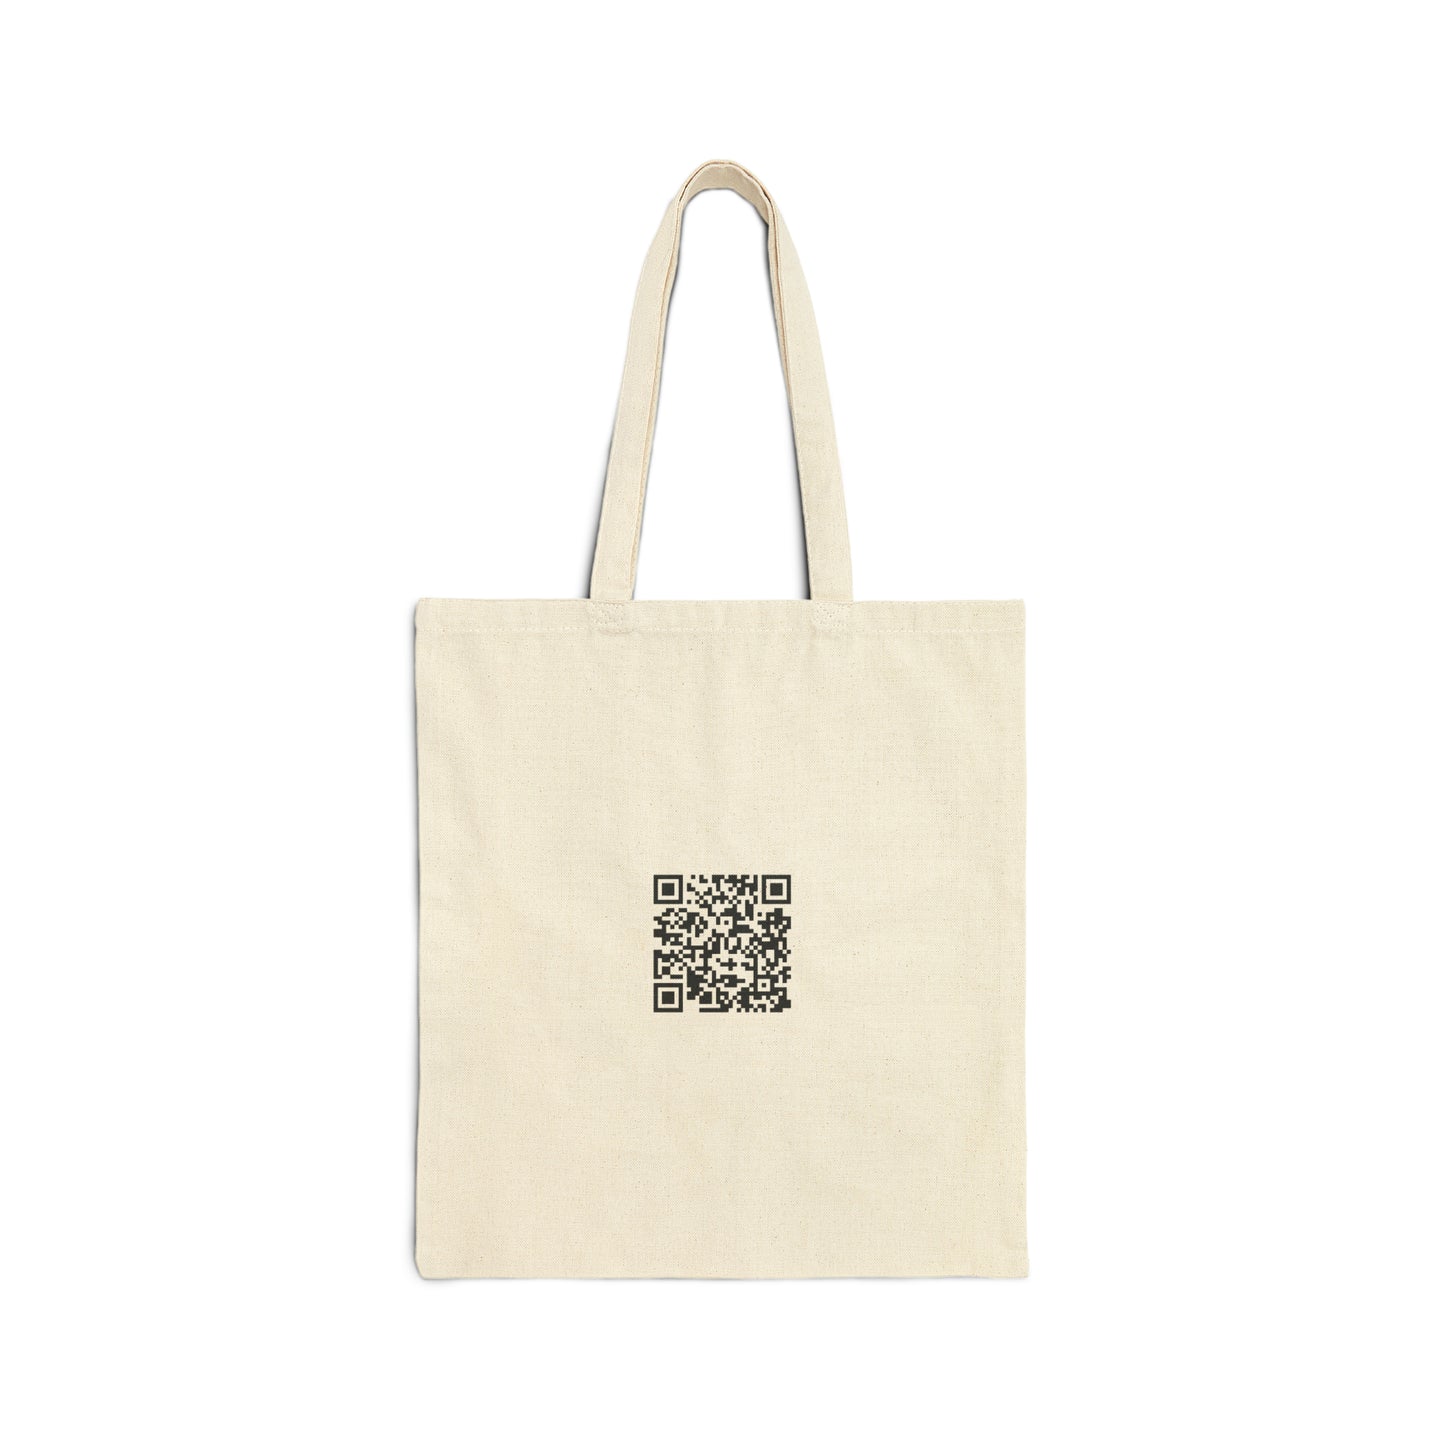 Come Join the Writer - Cotton Canvas Tote Bag